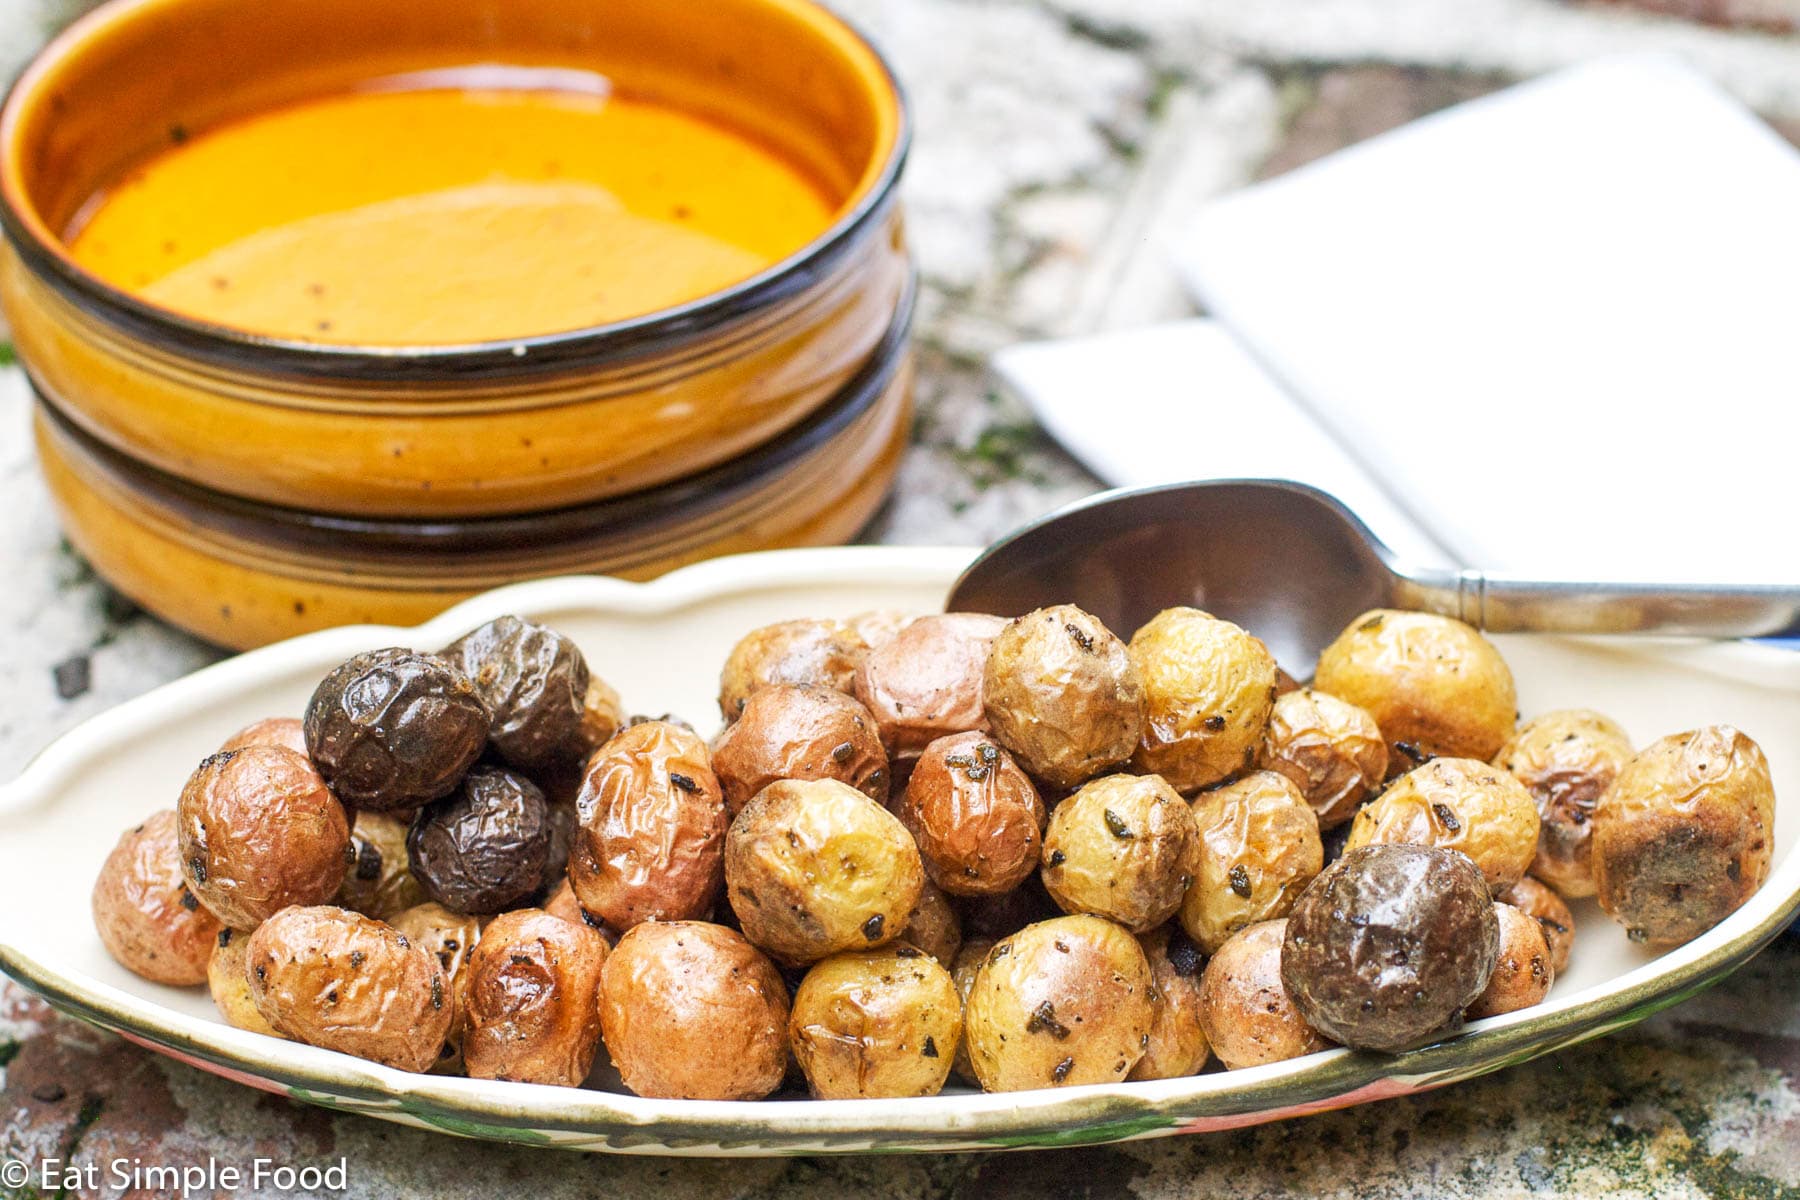 Roasted Whole Baby Potatoes With Rosemary in Shallow White Serving Bowl